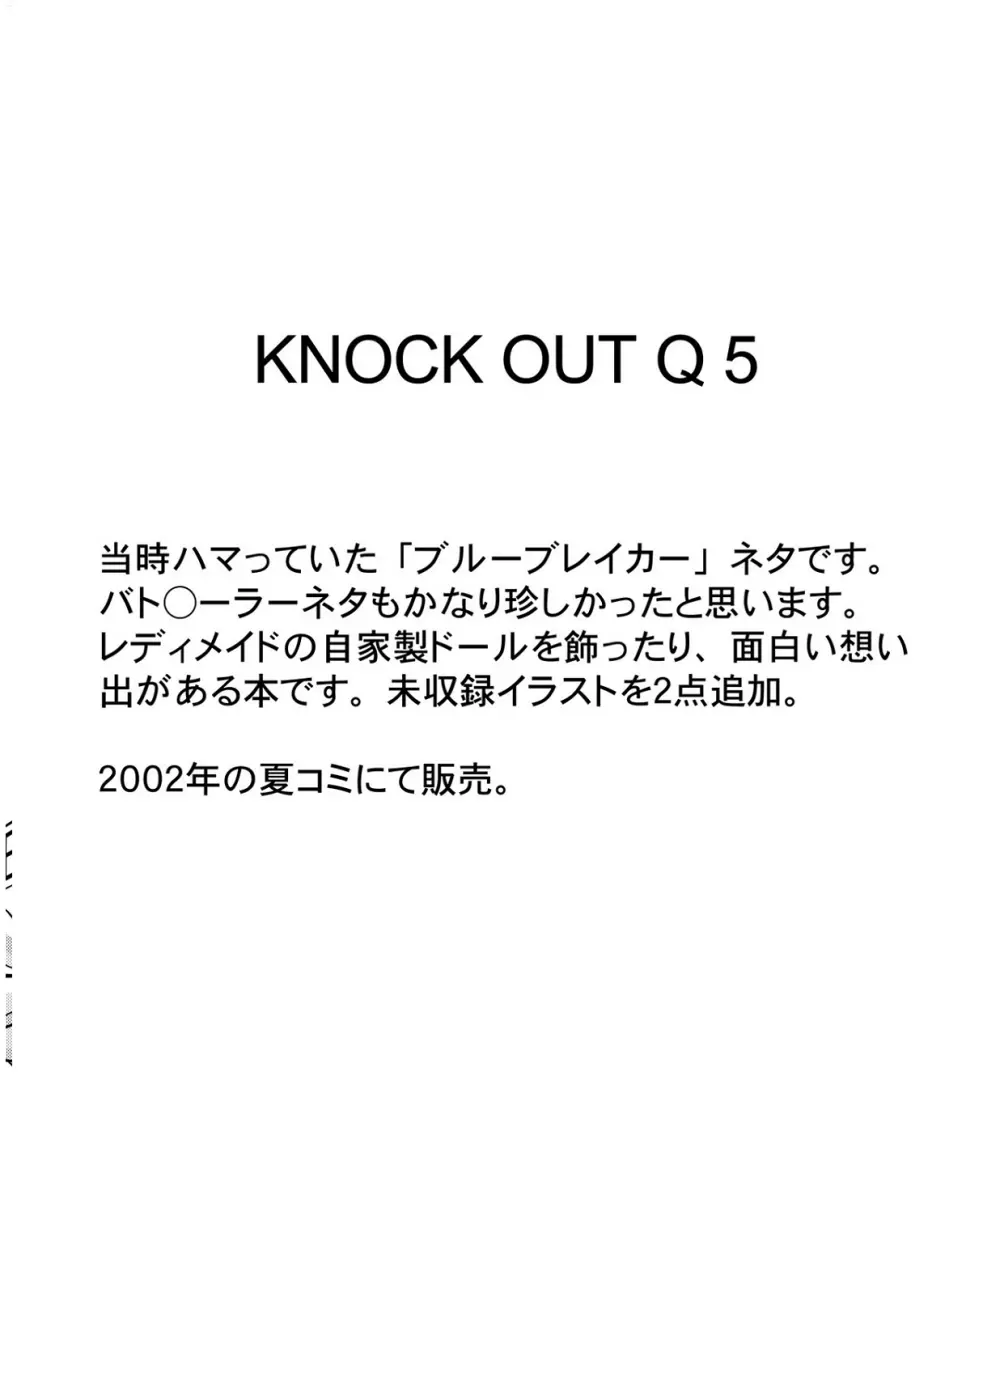 Knockout-Q 44ページ